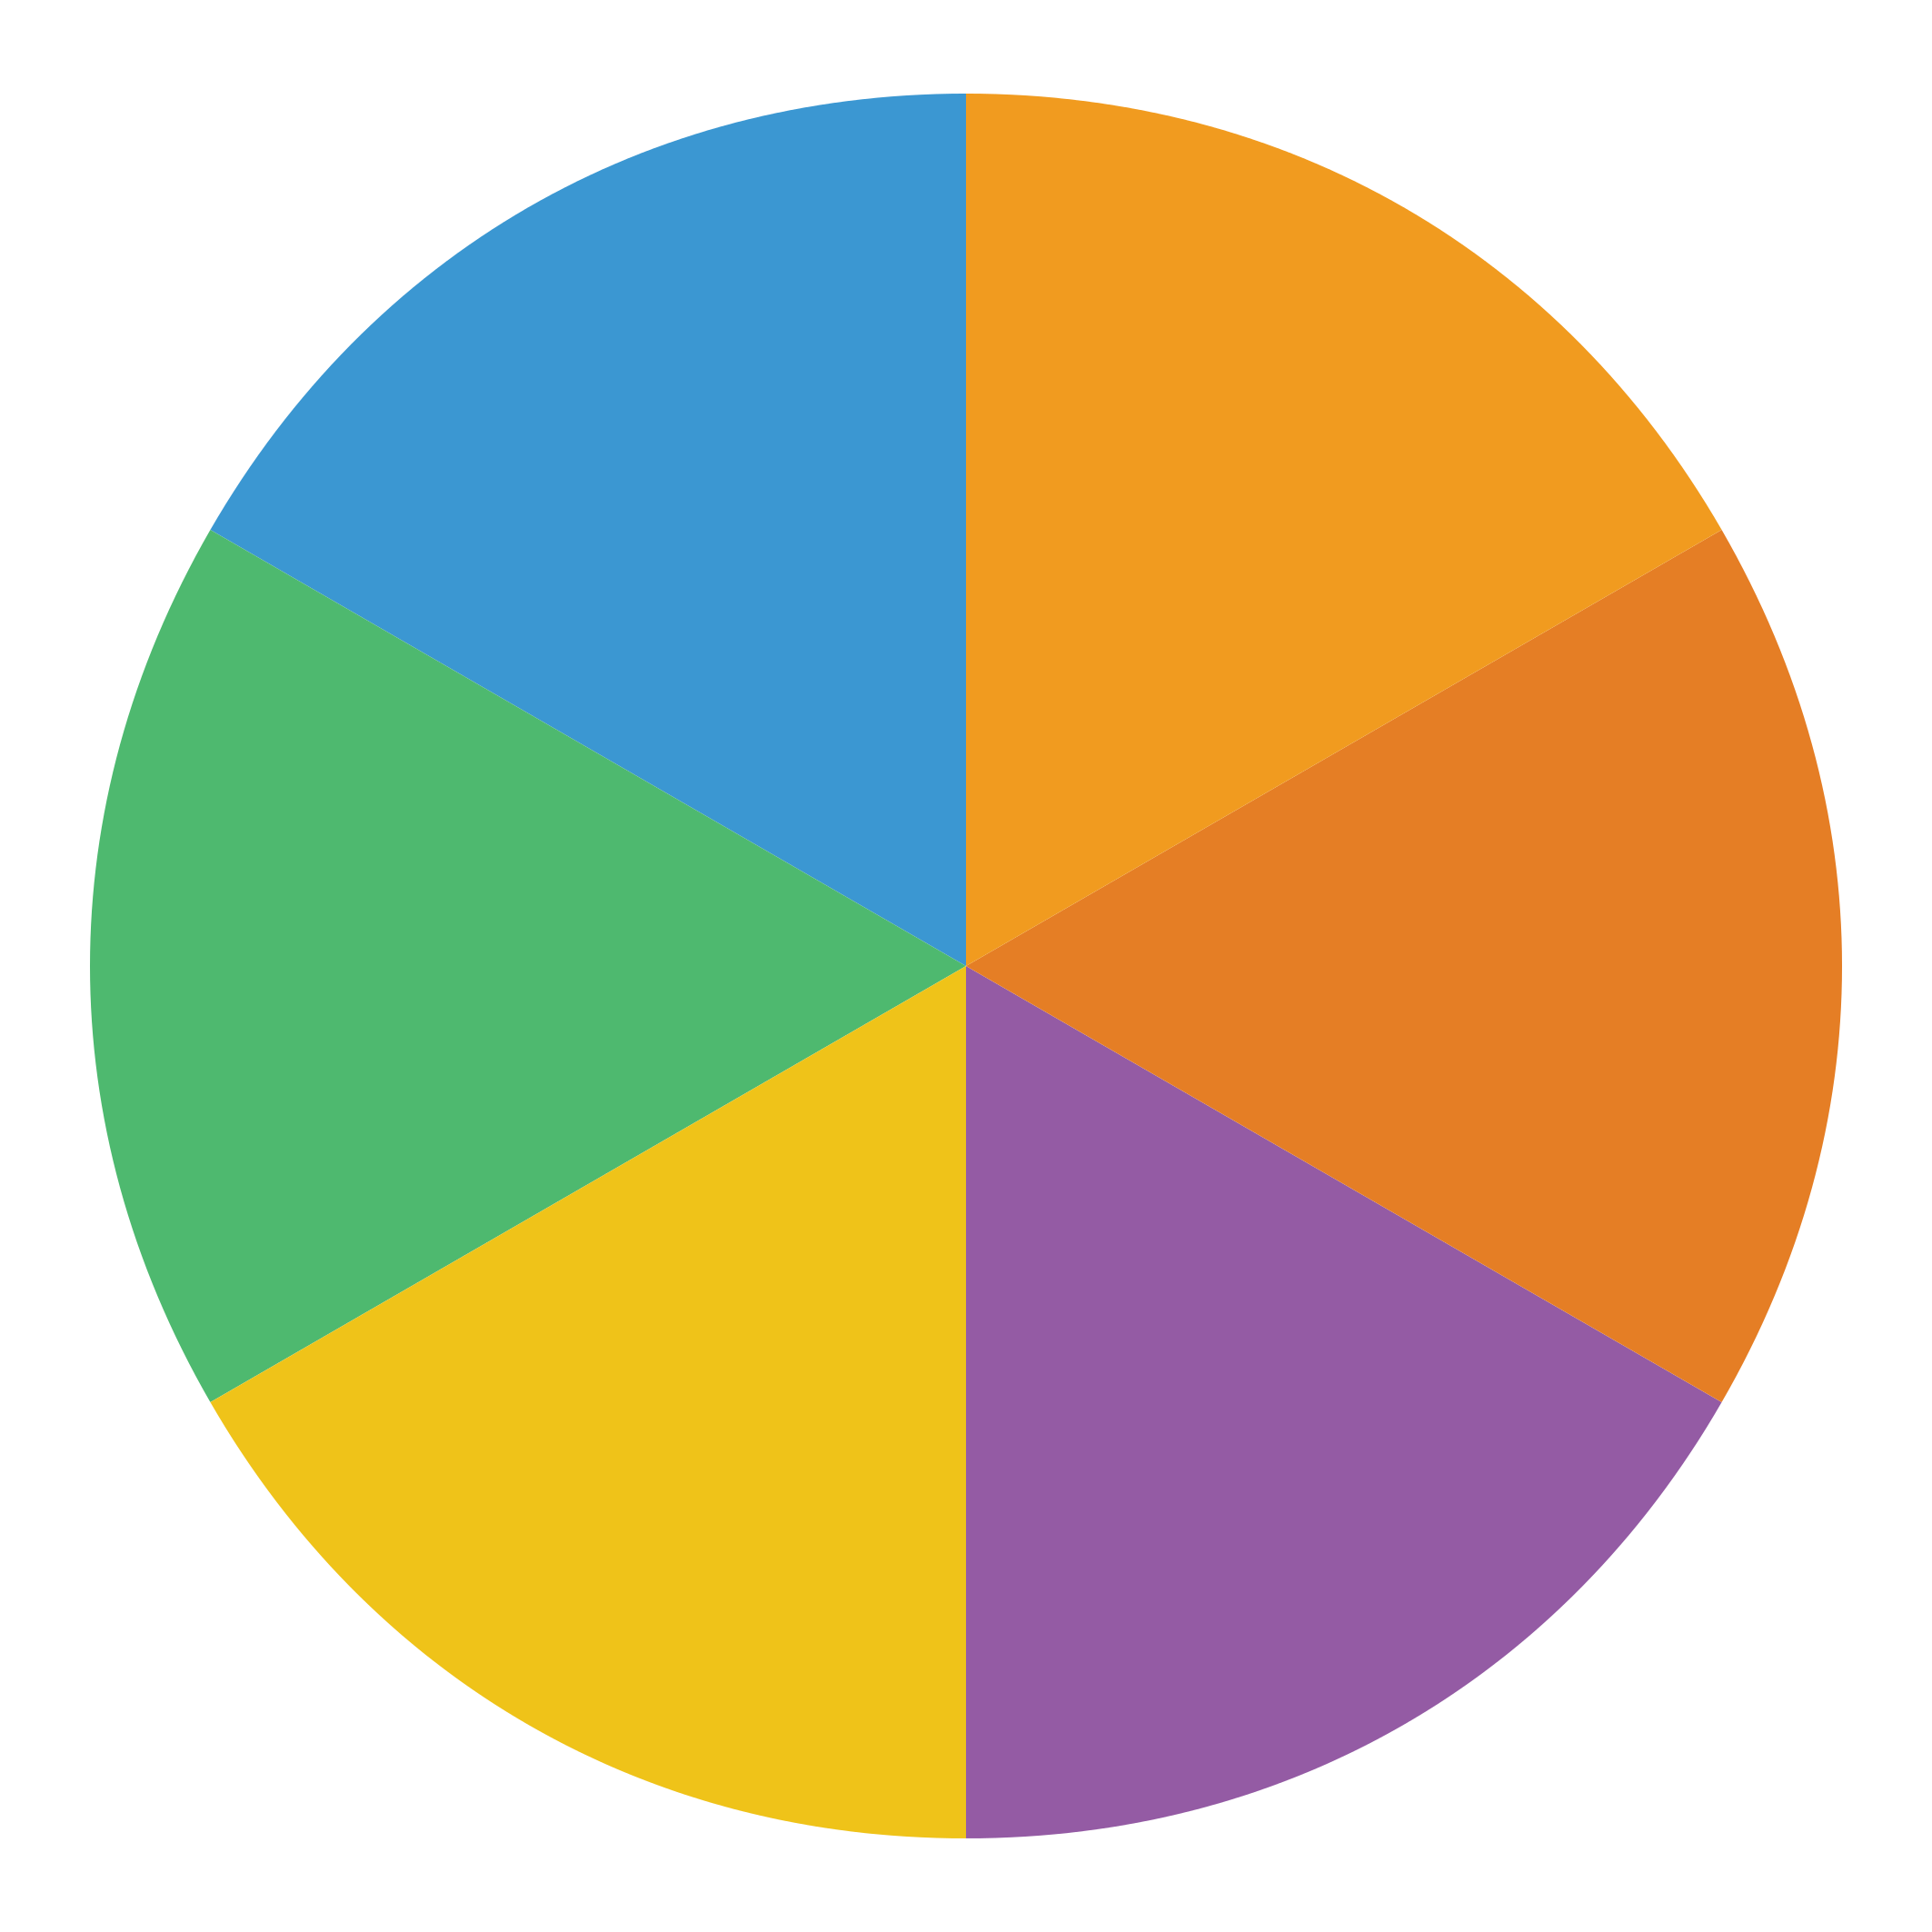 Pie-chart icon. PNG File: 512